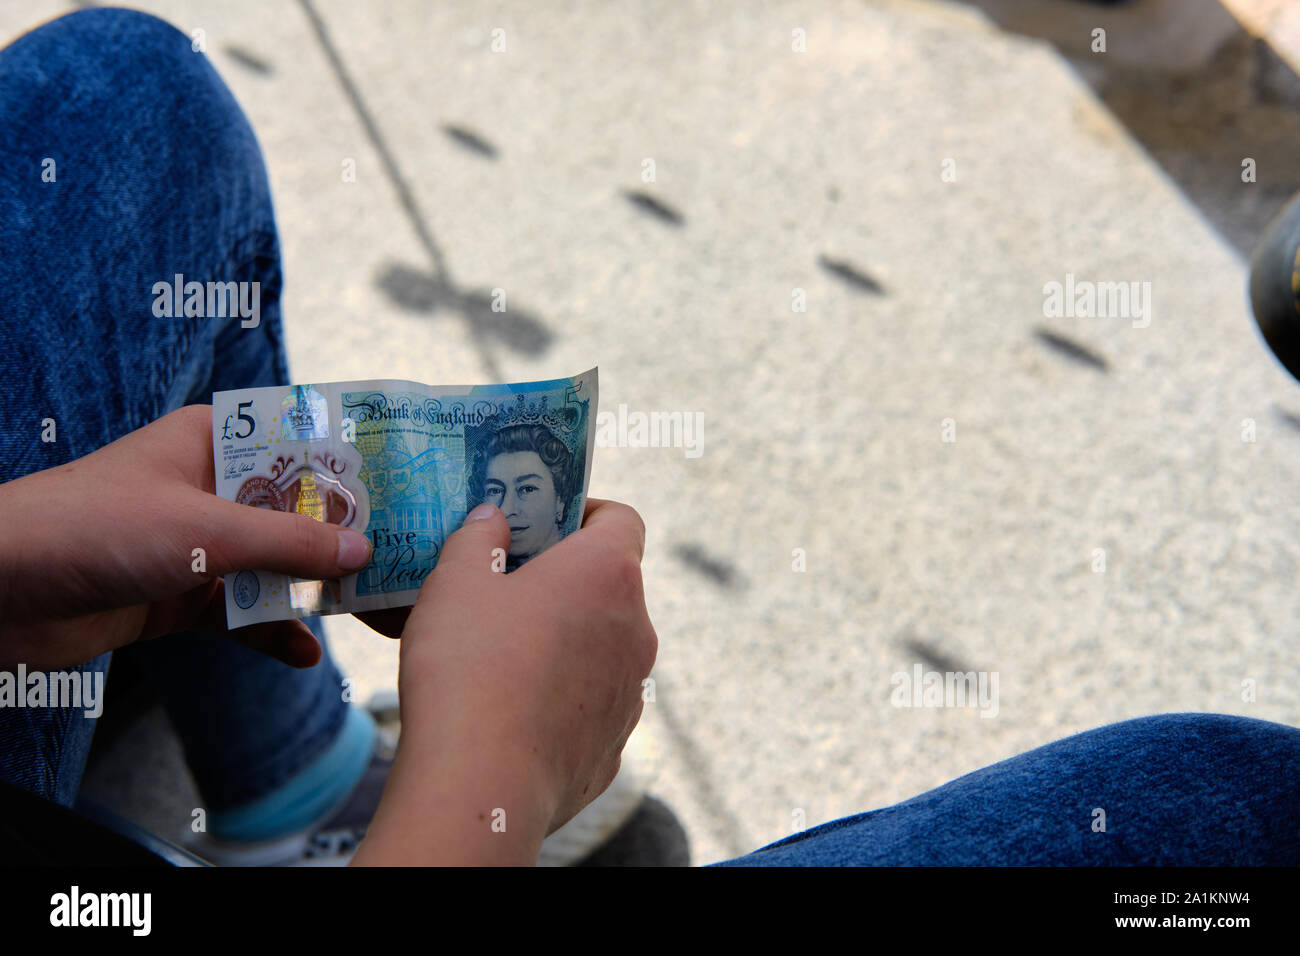 Leeds / UK - July 22nd 2019: A young person sits with a five pound sterling plastic note in their hand on a sunny day. Stock Photo